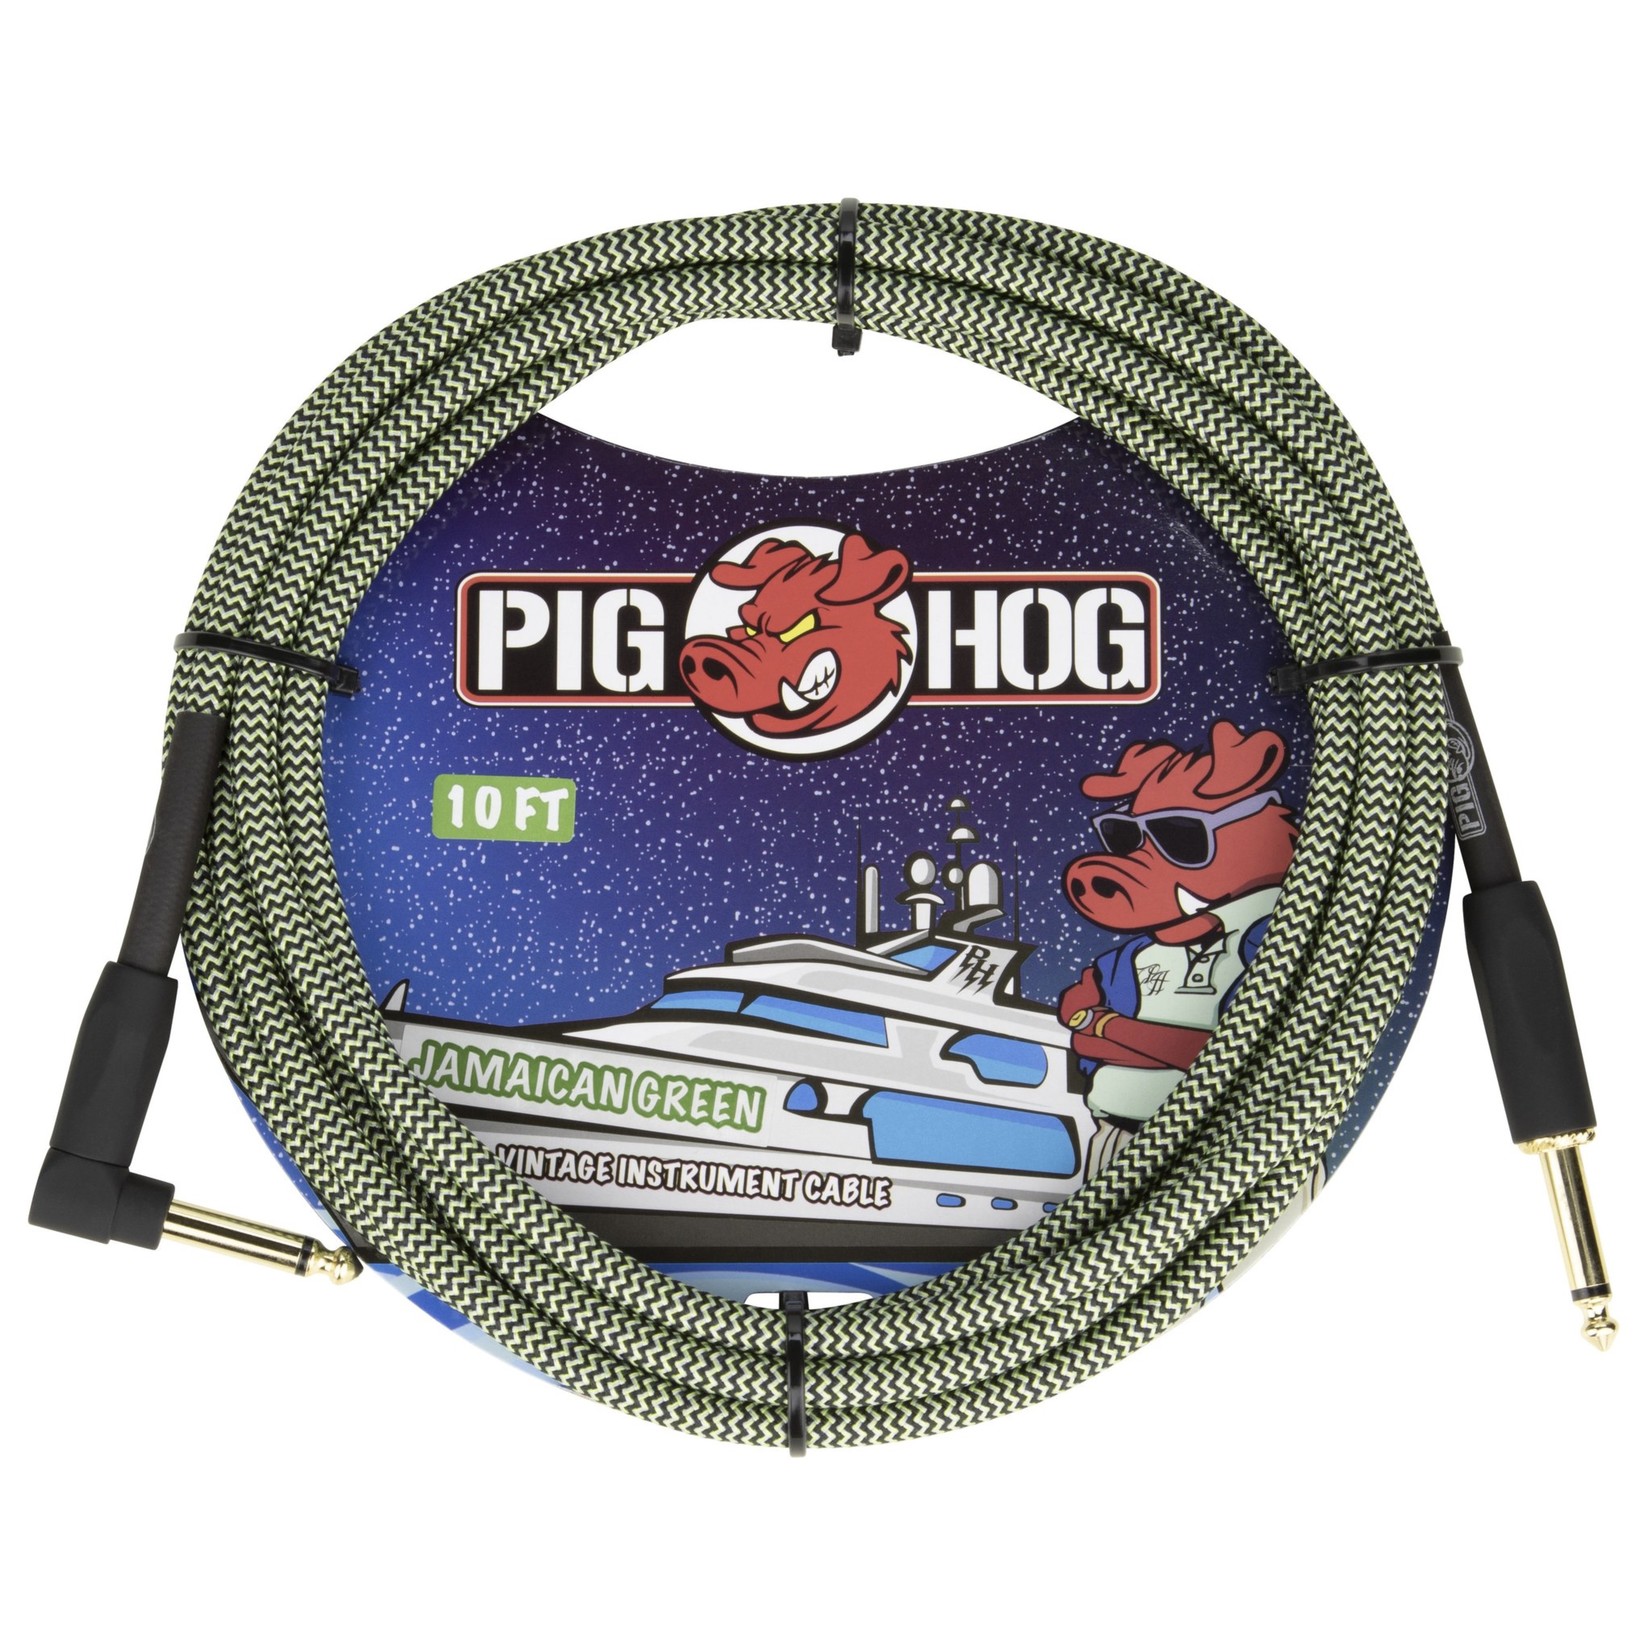 Pig Hog Pig Hog 10-Foot Vintage Woven Instrument Cable, 1/4" Straight-Right Angle, Jamaican Green